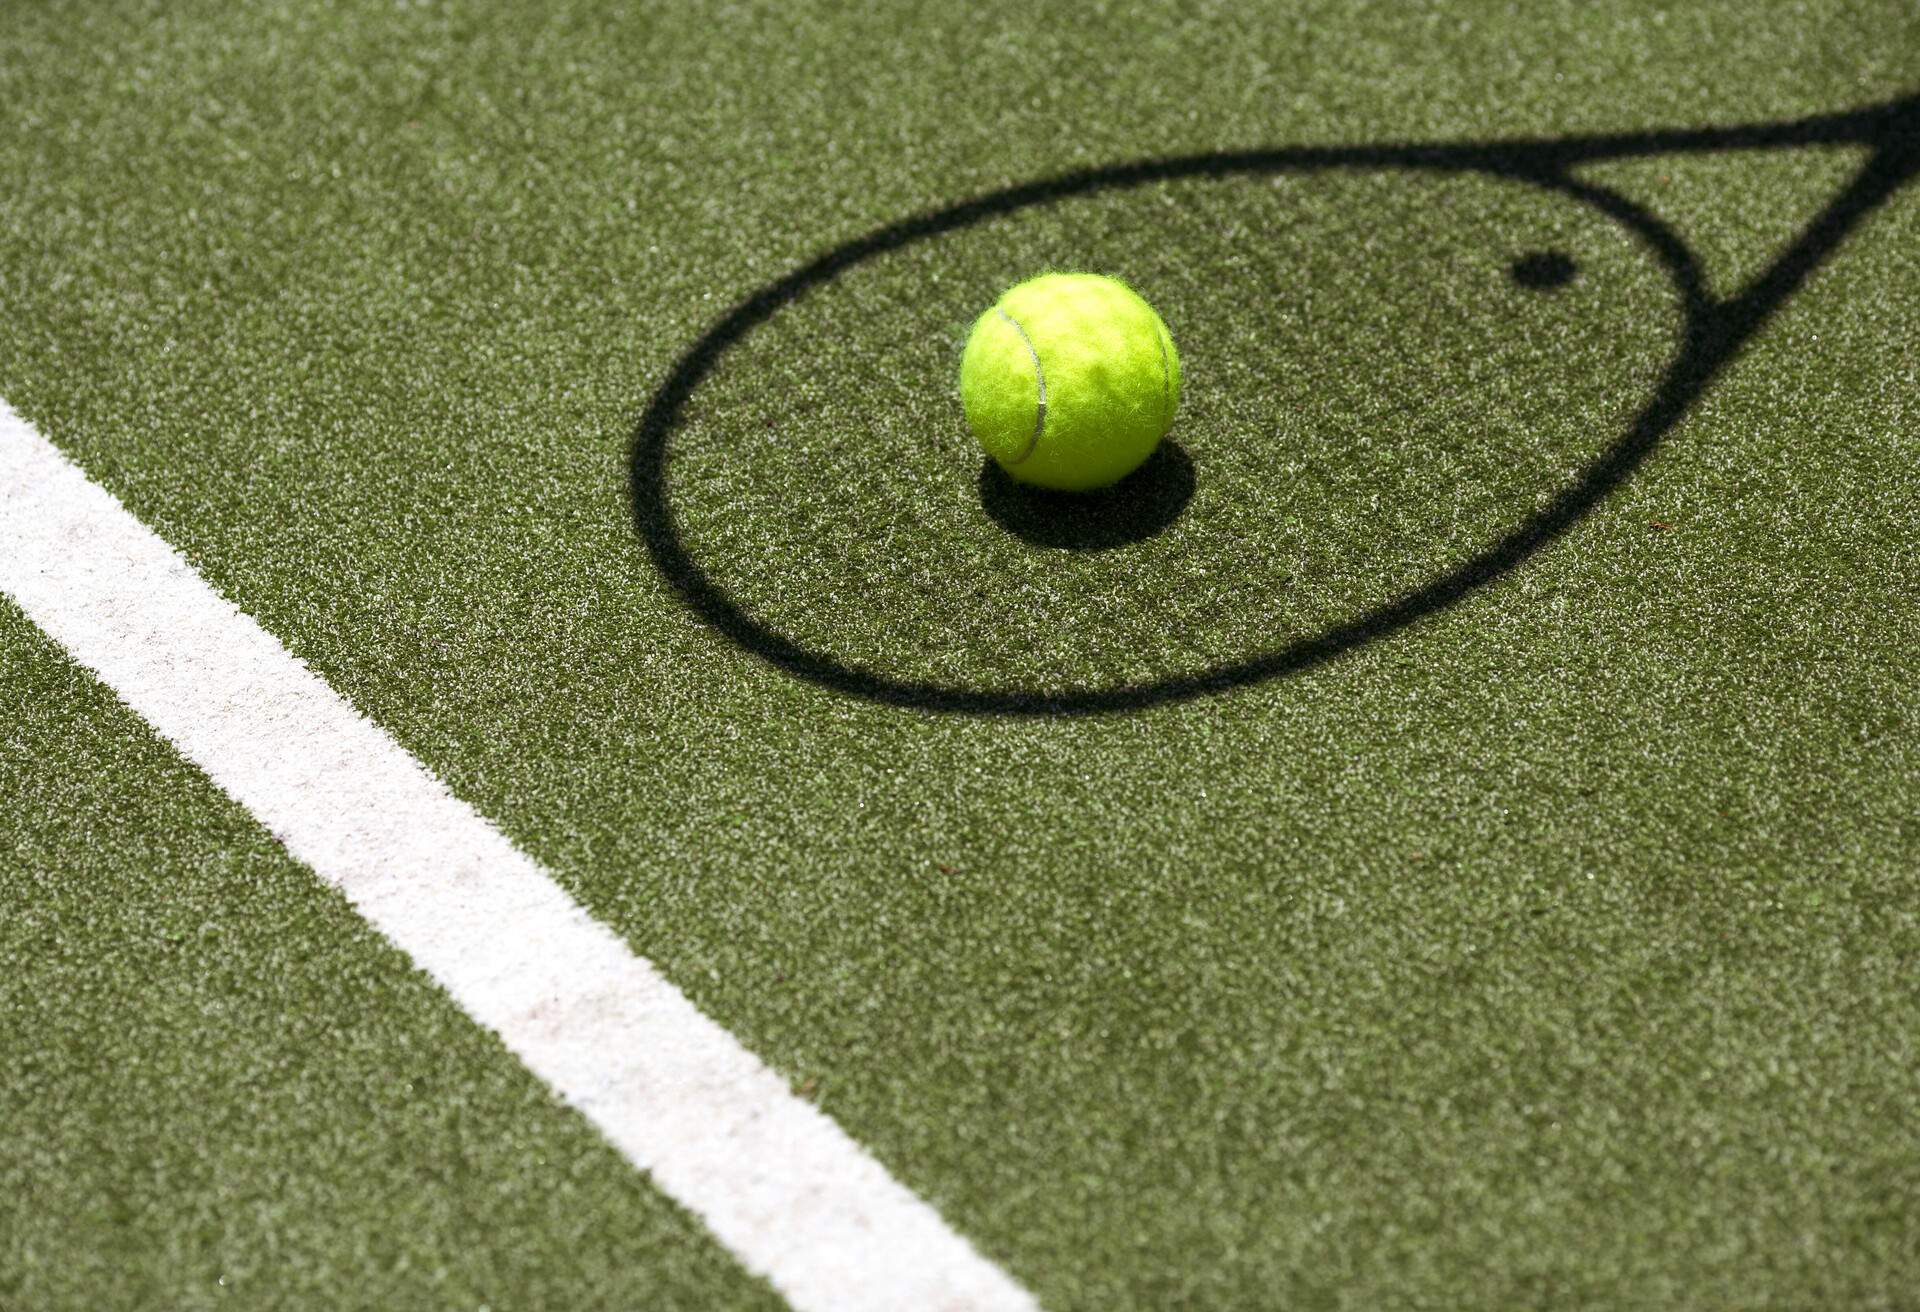 Tennis ball with racket shadow on grass court.